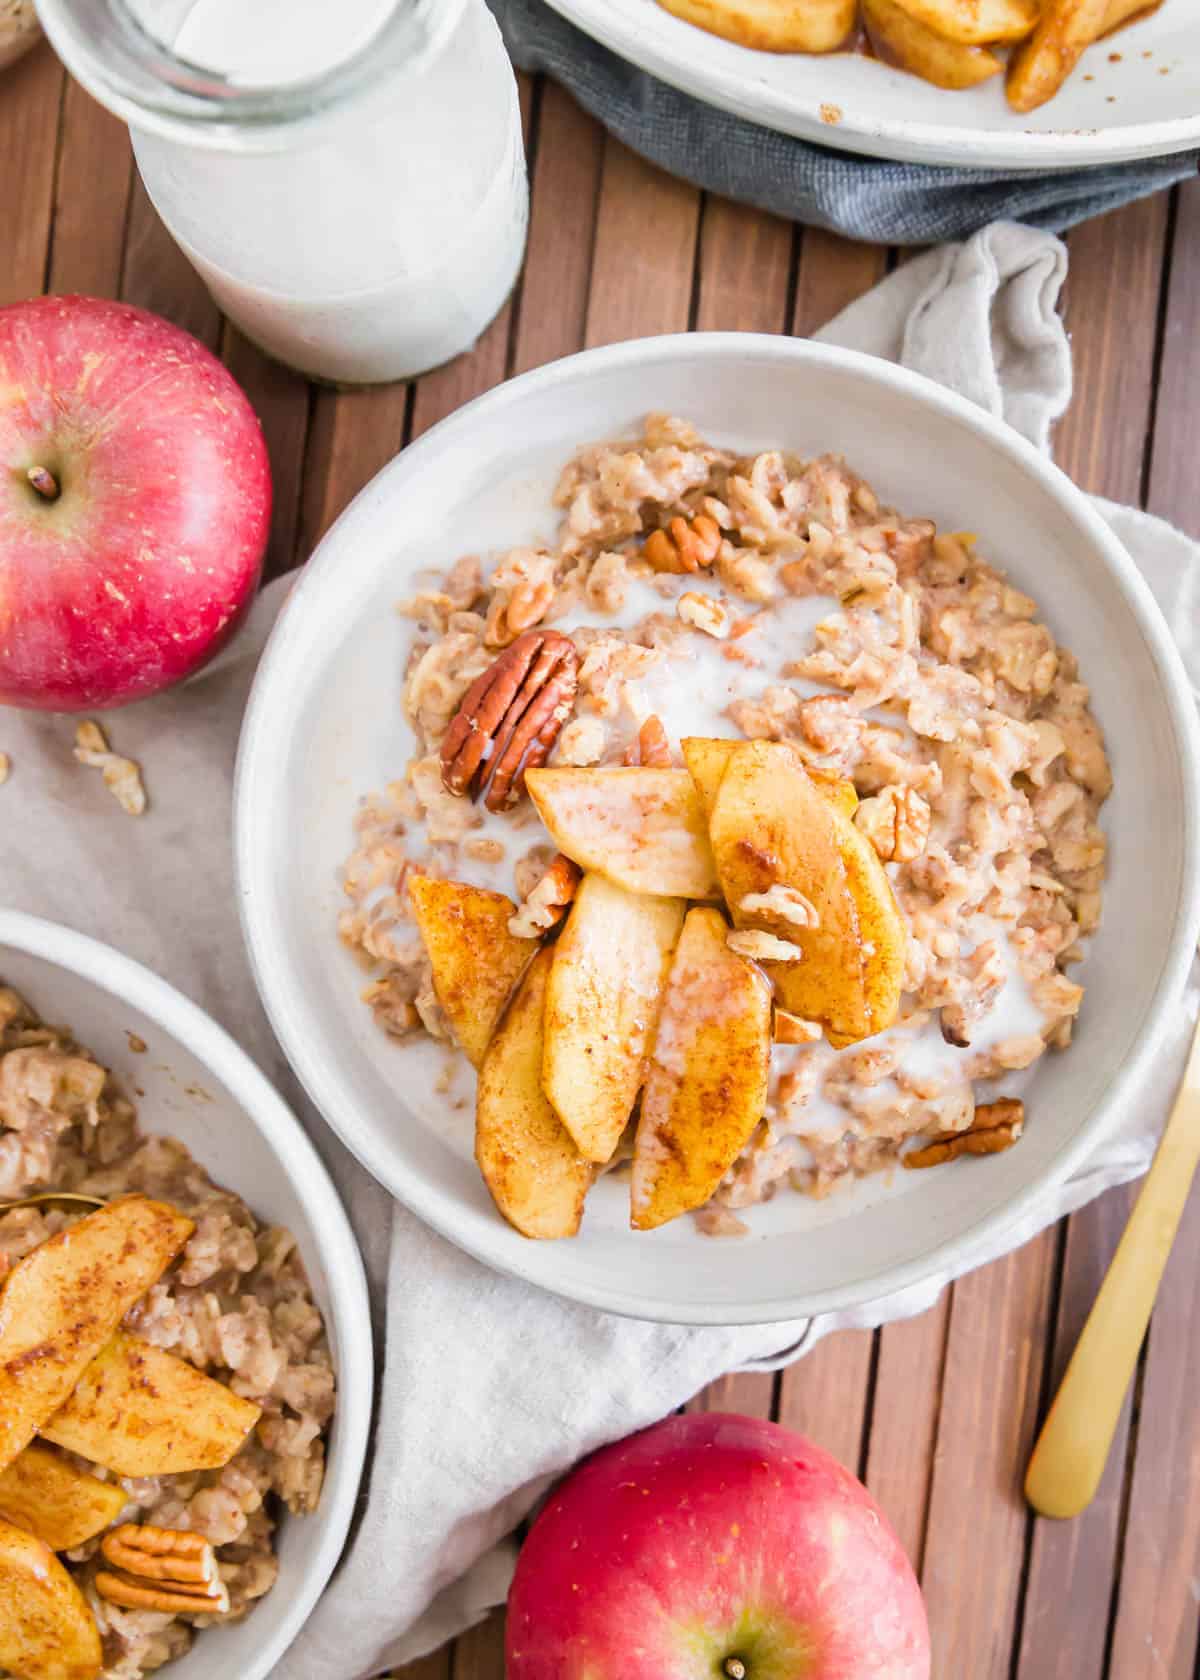 Apple cinnamon oatmeal is the perfect fall breakfast. It's packed with cooked apples and warming spices like cinnamon, nutmeg and ginger then topped with maple syrup sautéed apple slices and chopped pecans.